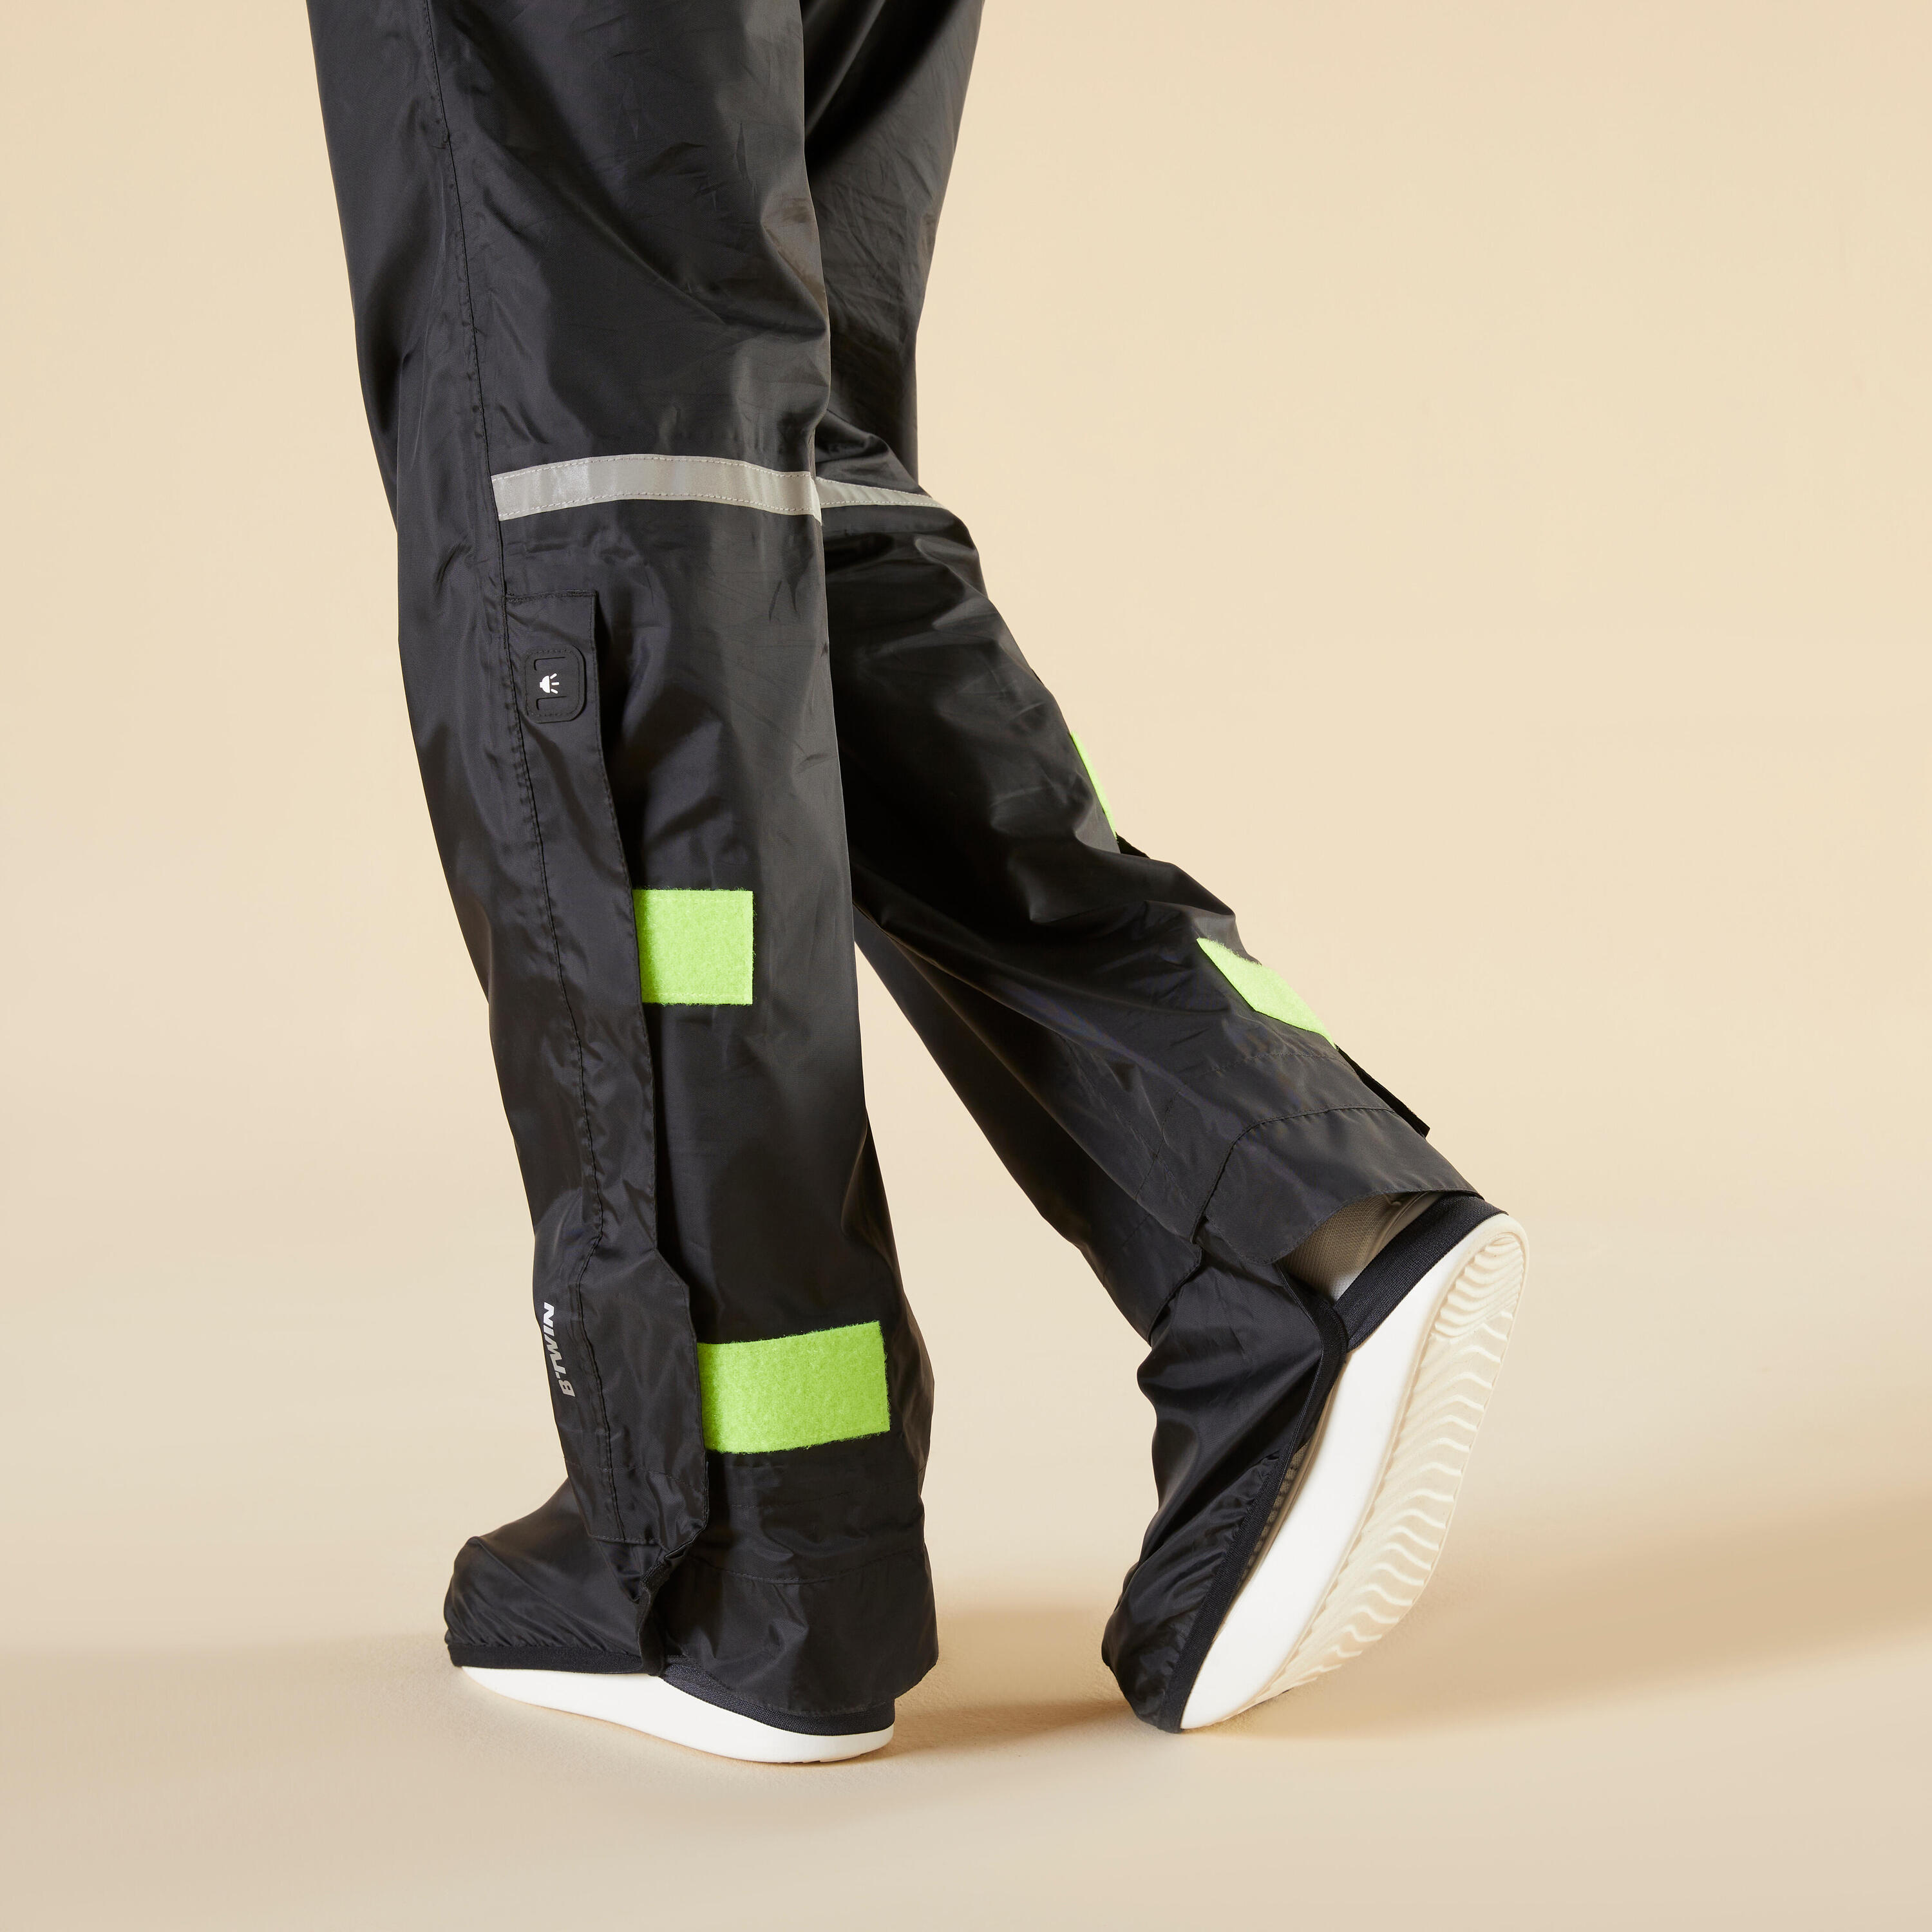 City Cycling Rain Overtrousers with Built-In Overshoes 100 - Black 4/14